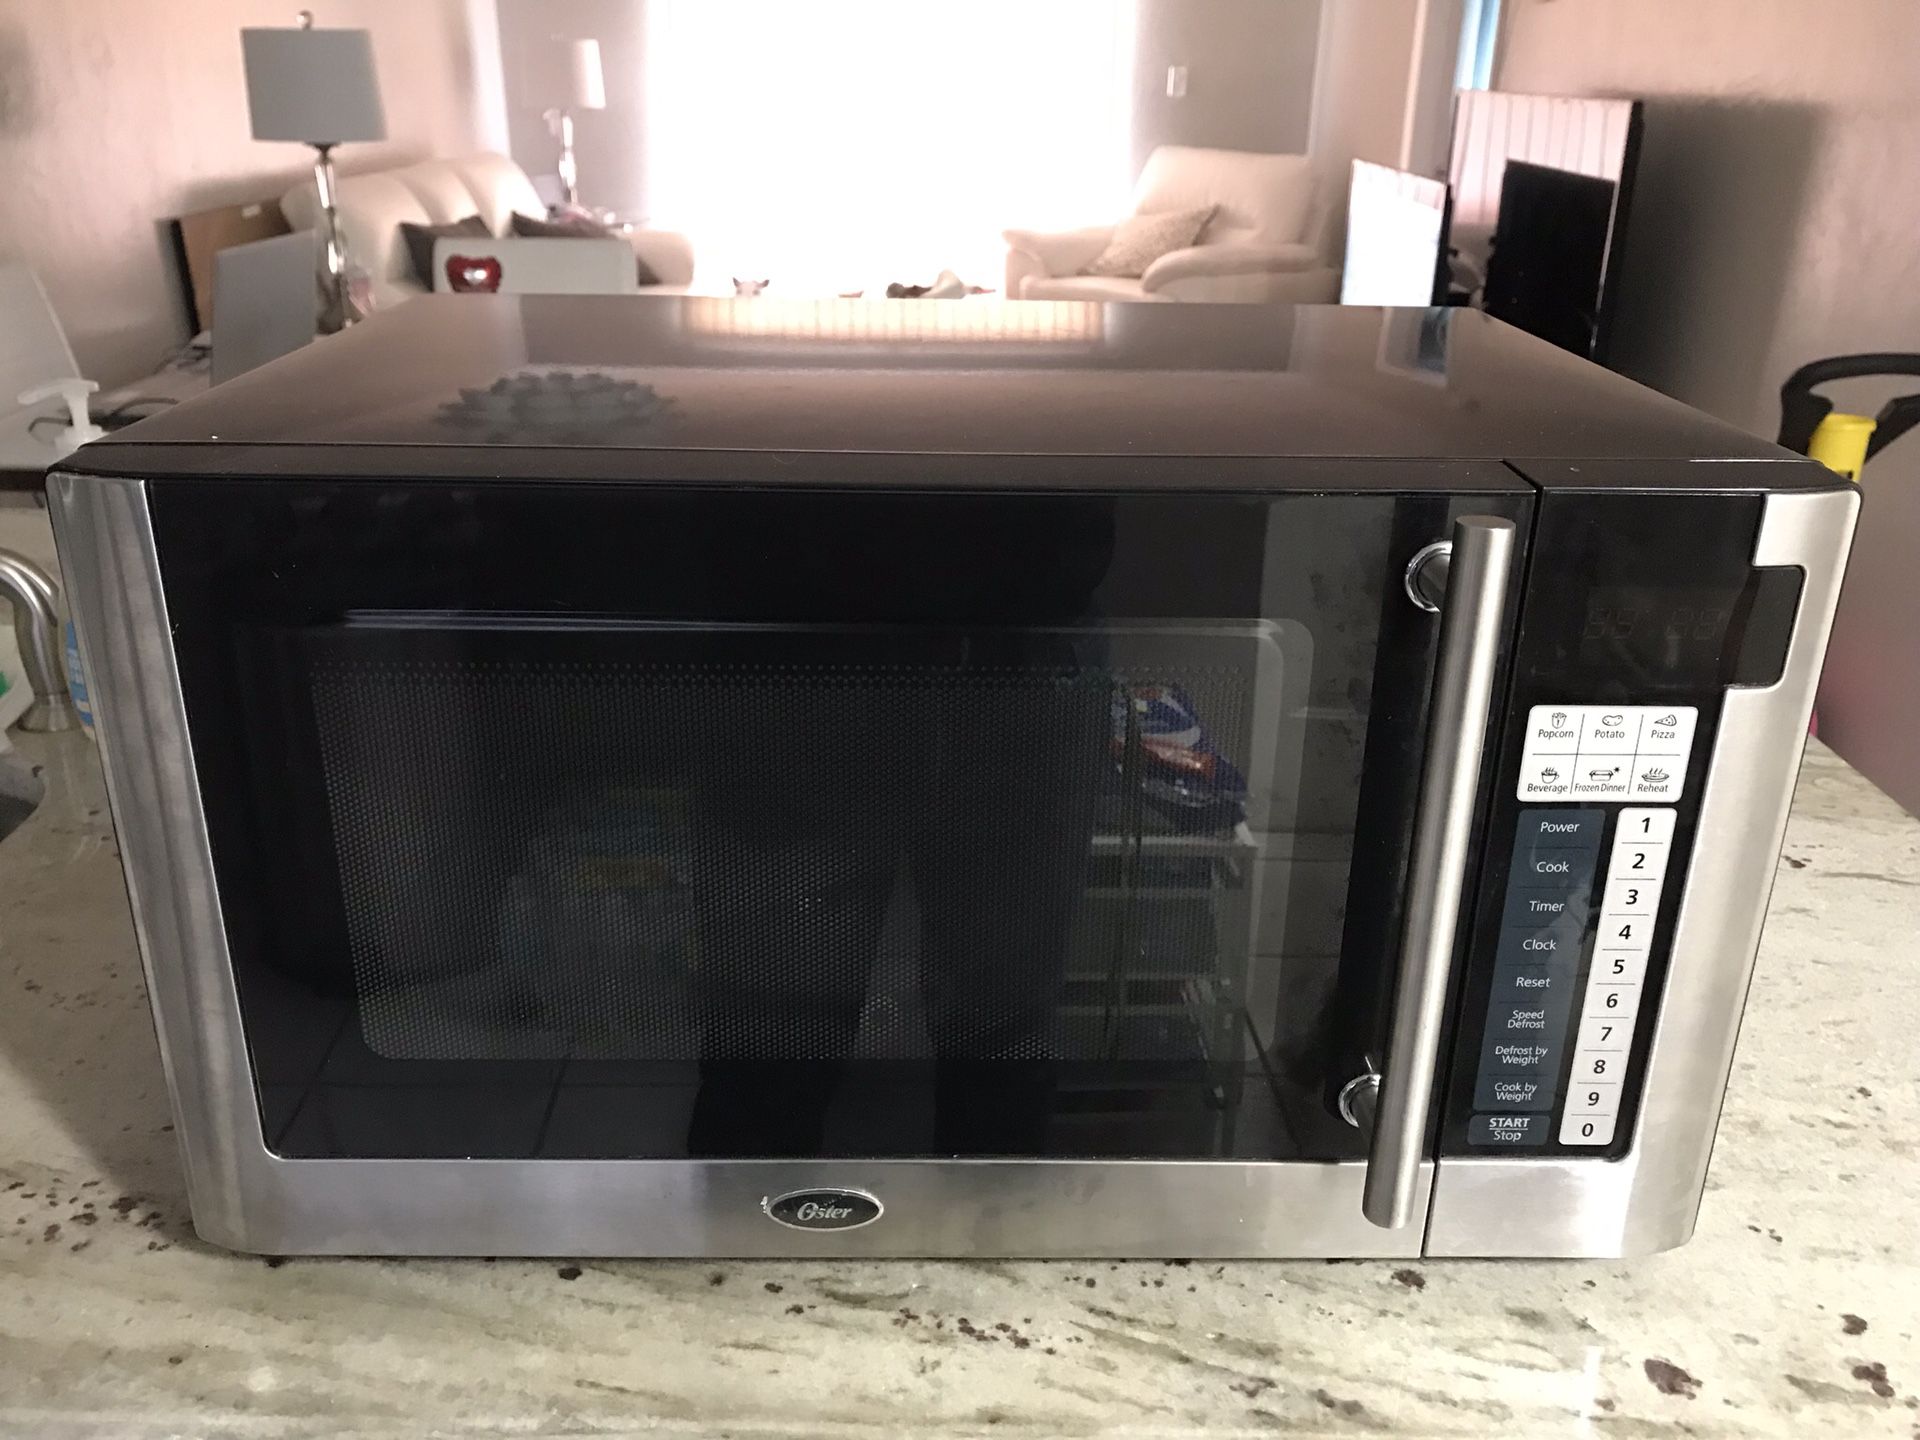 Oster OGG61101 1.1 cu. ft. 1000W Digital Microwave Oven, Stainless Steel &  Black, 1 - Fry's Food Stores